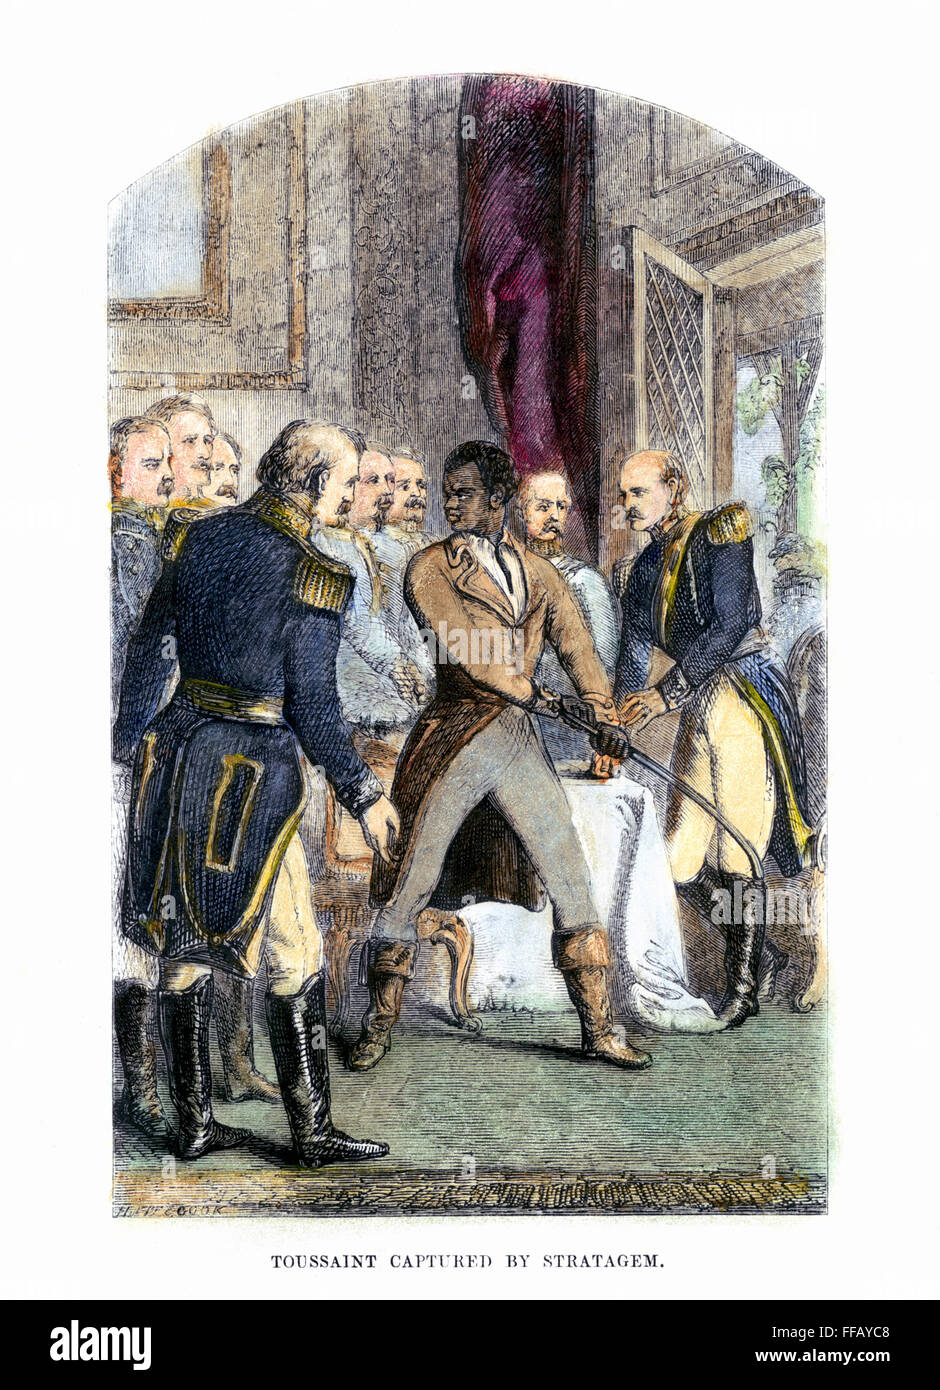 TOUSSAINT L'OUVERTURE /n(1743-1803). Pierre Dominique Toussaint L'Ouverture. Haitian general and liberator. L'Ouverture captured by French officers after accepting an offer to discuss peace terms, 7 June 1802. Wood engraving, 19th century. Stock Photo